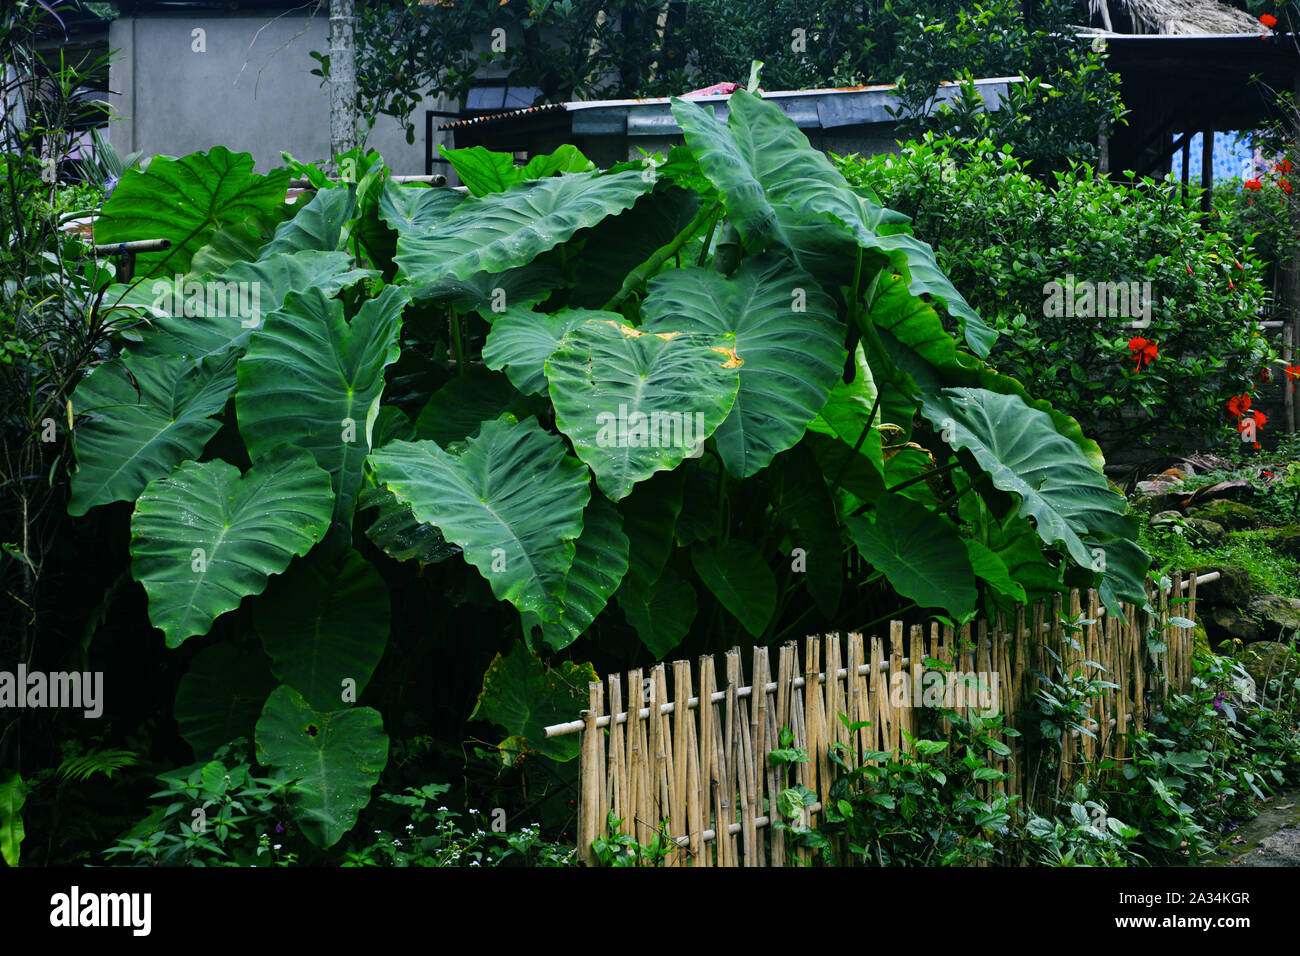 Big green leaves of Taro plant also known as colocasia esculenta, China Rose(Hibiscus Rosasinensis)also known as Chinese hibiscus and shoeblack plant Stock Photo